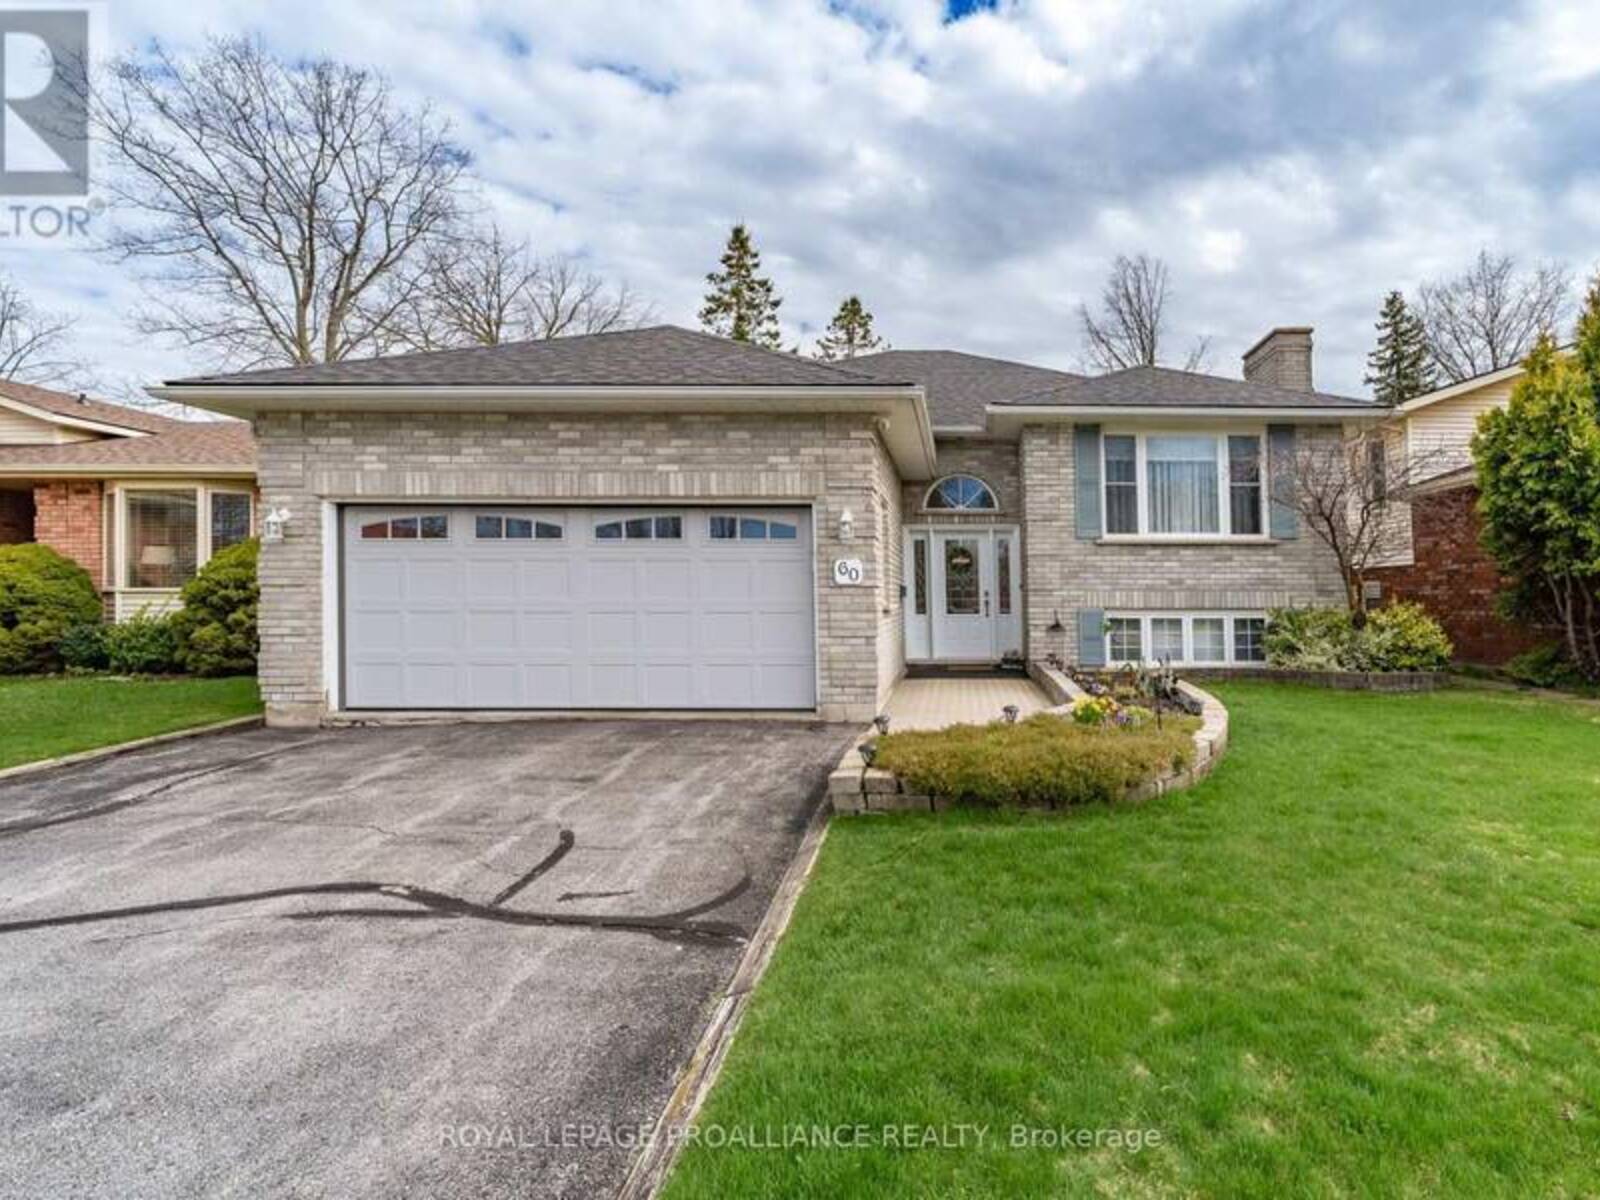 60 FORCHUK CRES, Quinte West, Ontario K8V 6N2